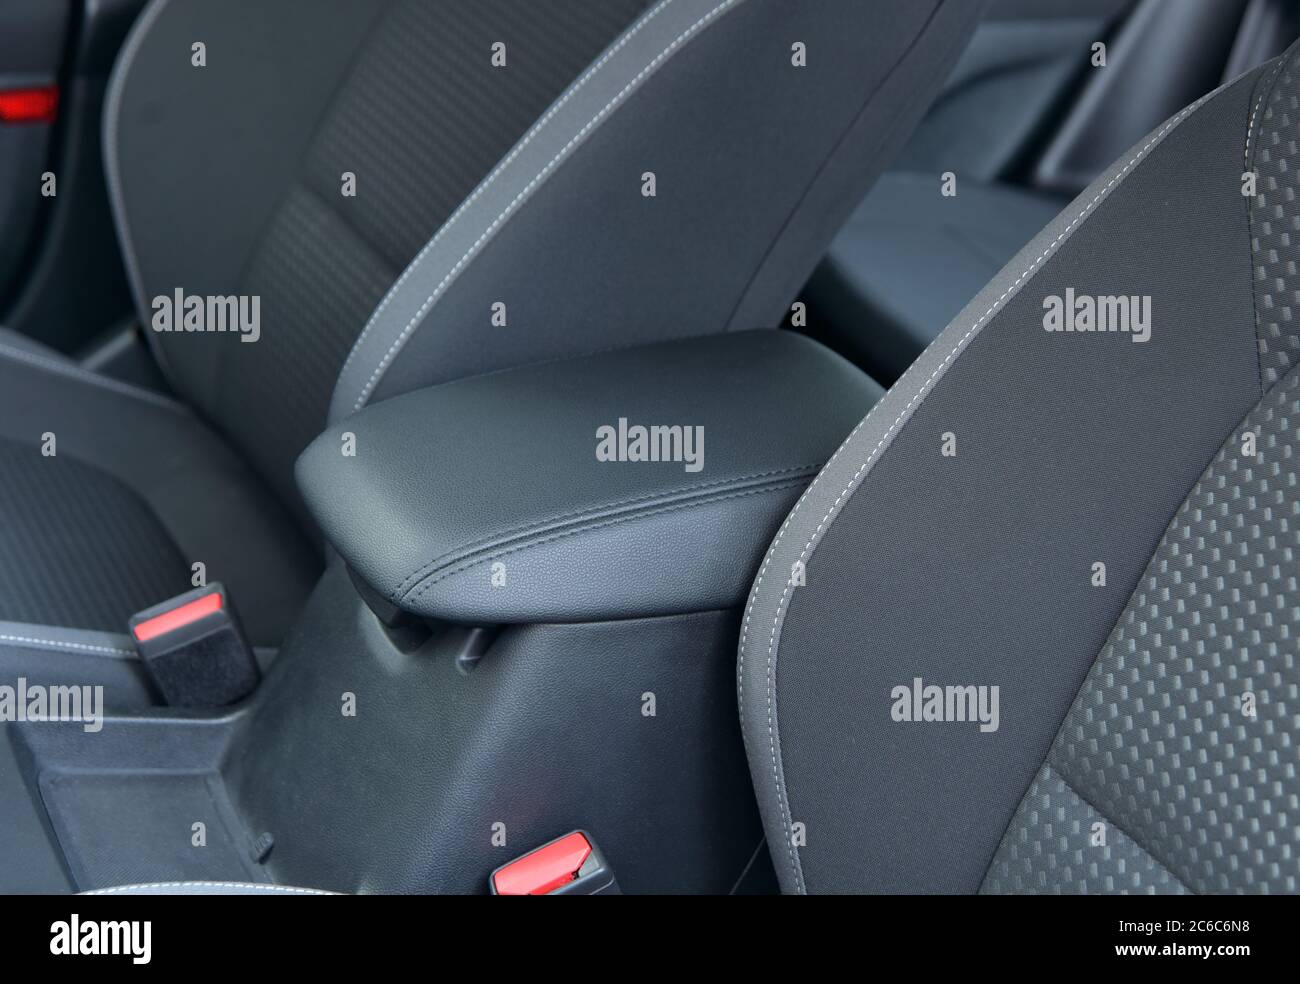 Armrest in the luxury passenger car between front seats. Stock Photo